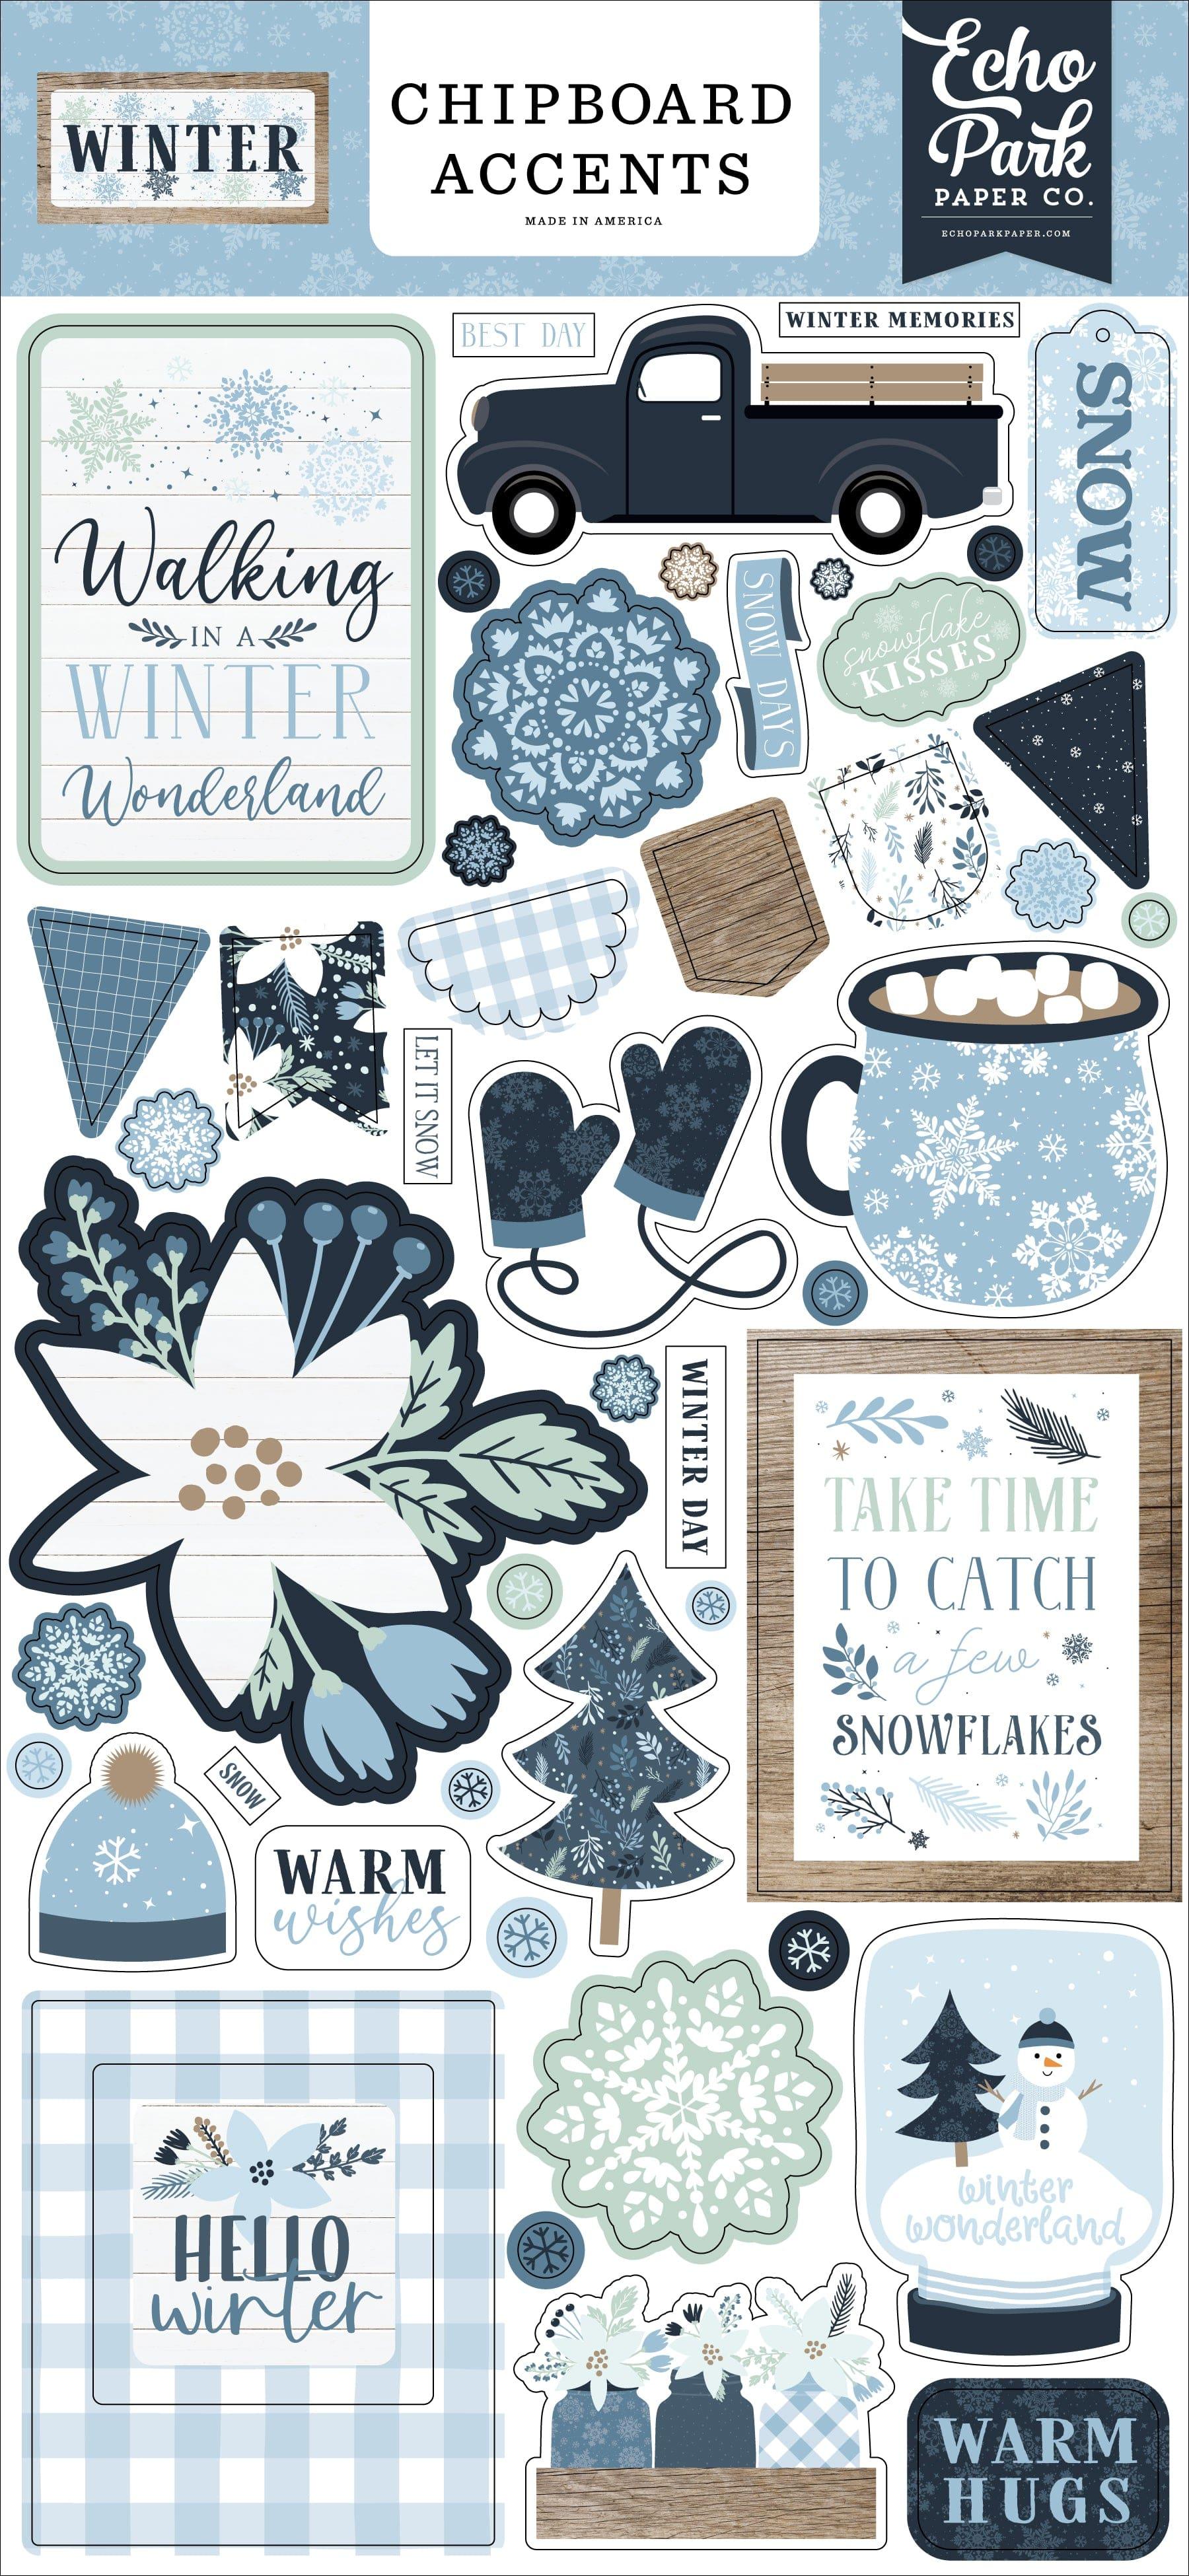 Winter Collection 6 x 12 Scrapbook Chipboard Accents by Echo Park Paper - Scrapbook Supply Companies